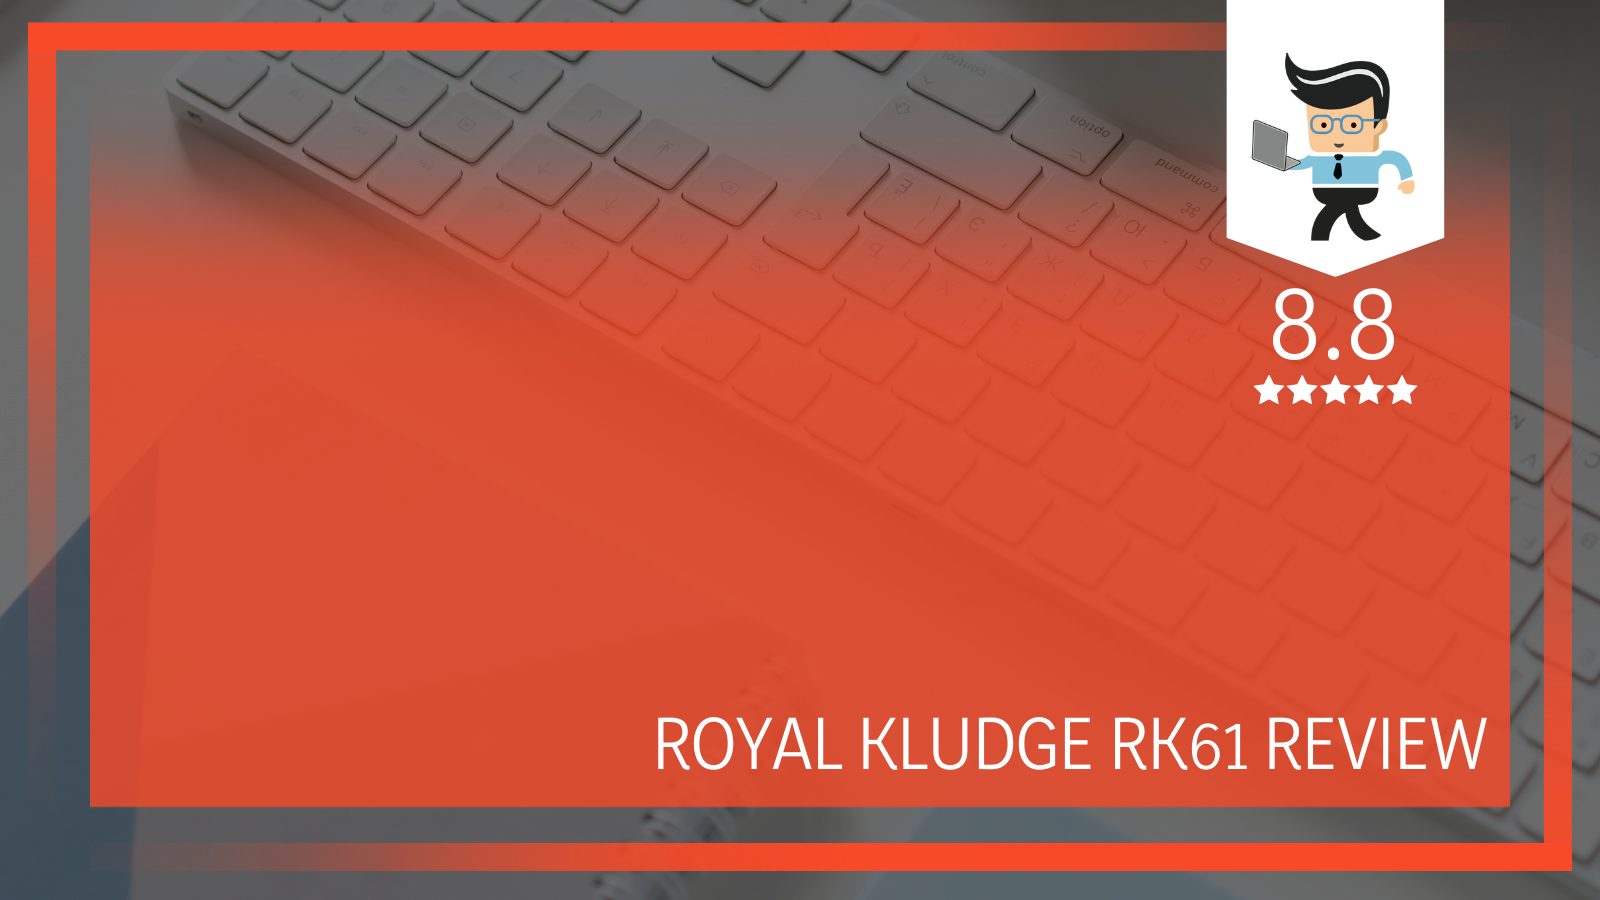 Royal Kludge RK61 Review